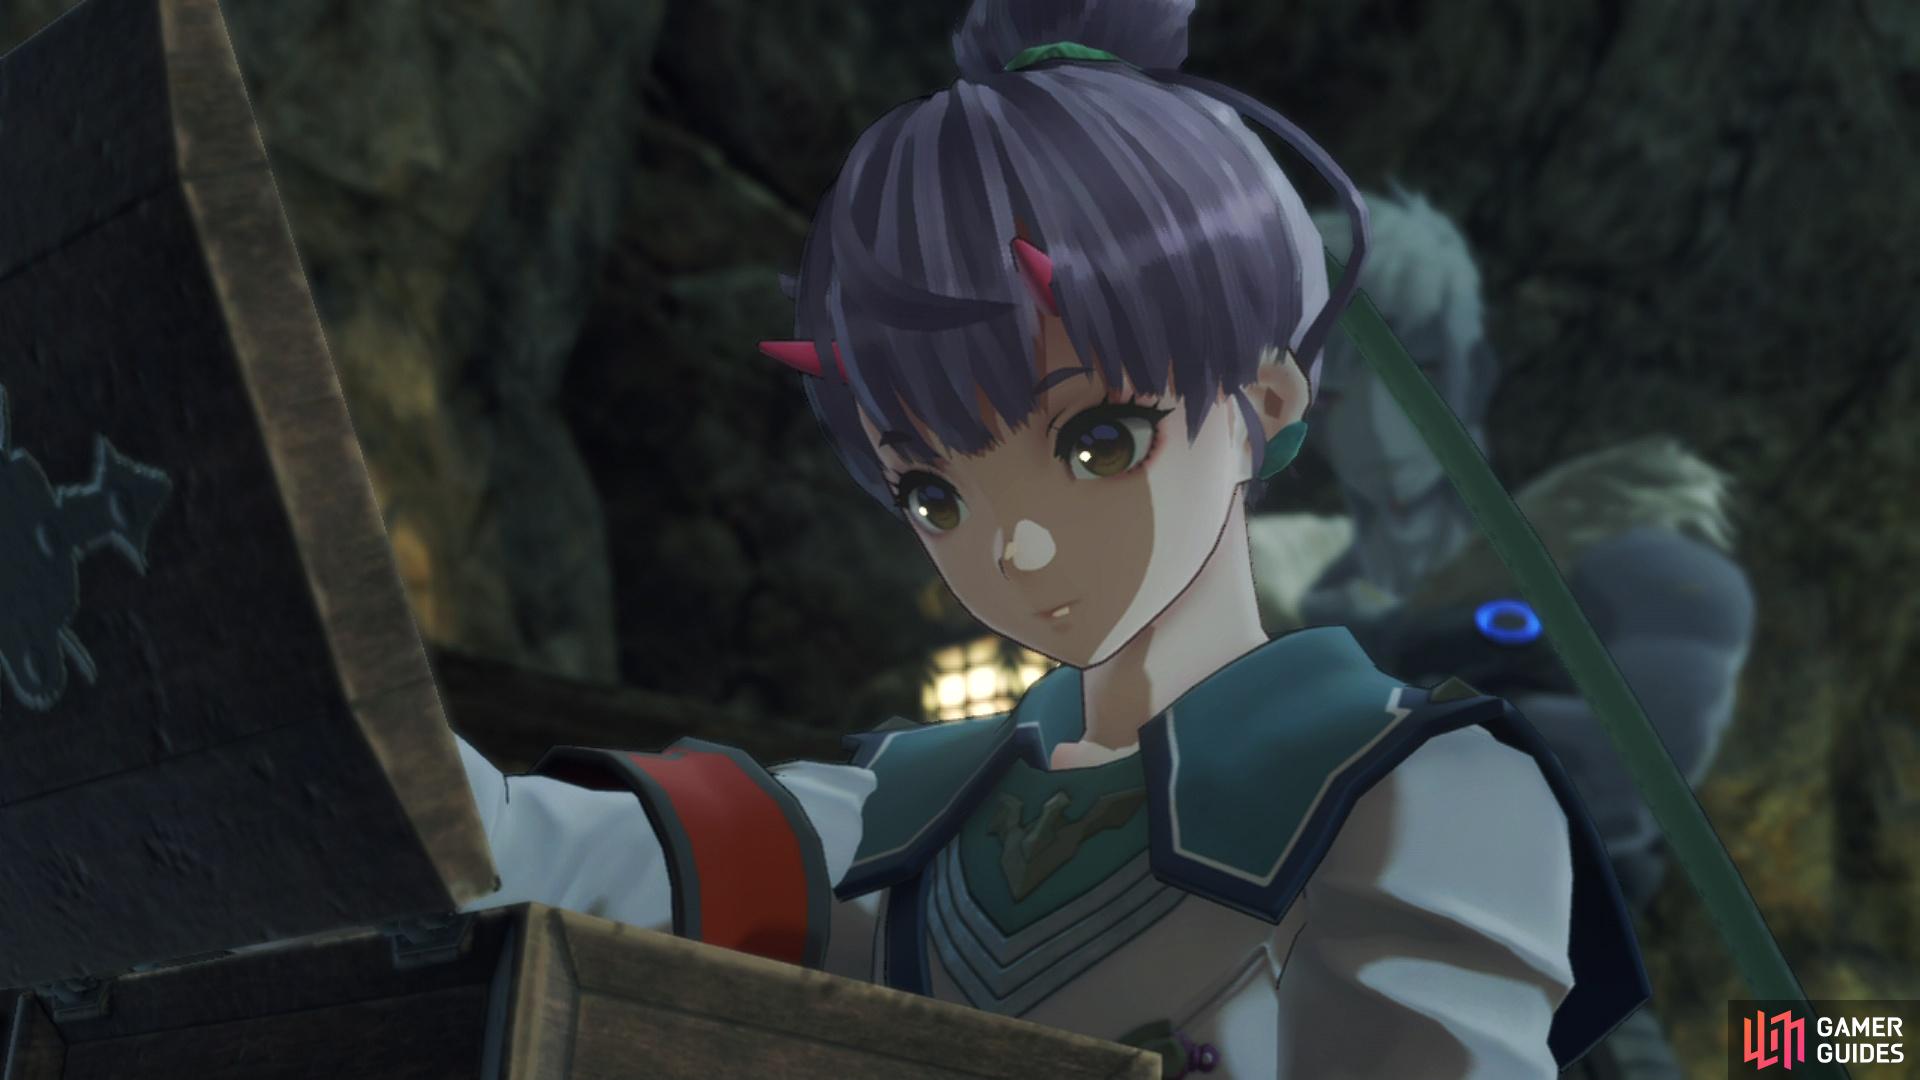 A Farewell Rest is Fiona’s Ascension Quest in Xenoblade Chronicles 3.